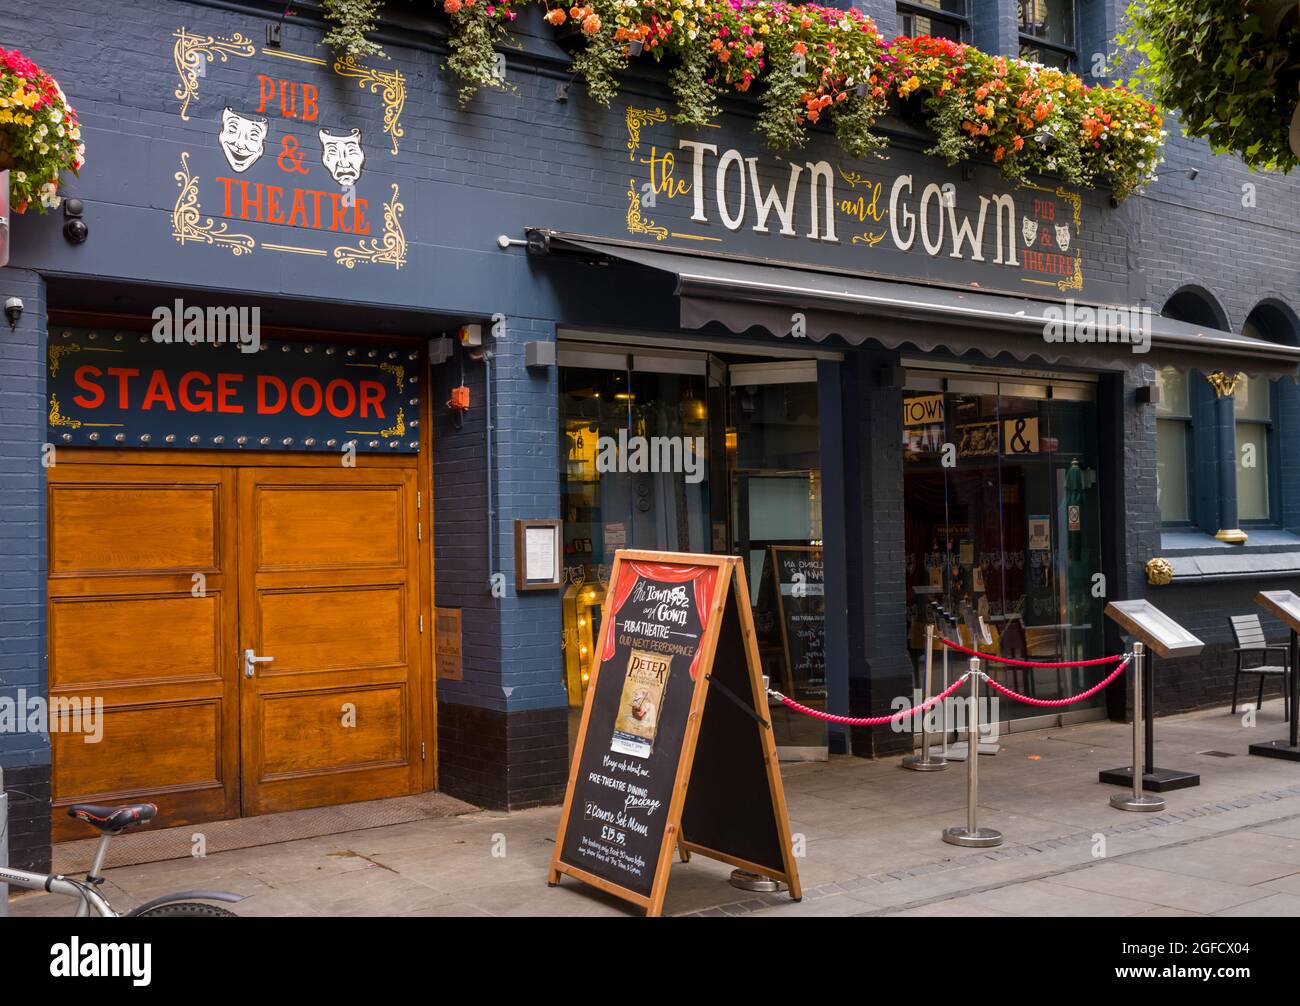 Town and Gown Pub and Theatre in Cambridge UK.  The Town and Gown Pub & Theatre opened in 2020 and is a McMullen Brewery Pub. Stock Photo